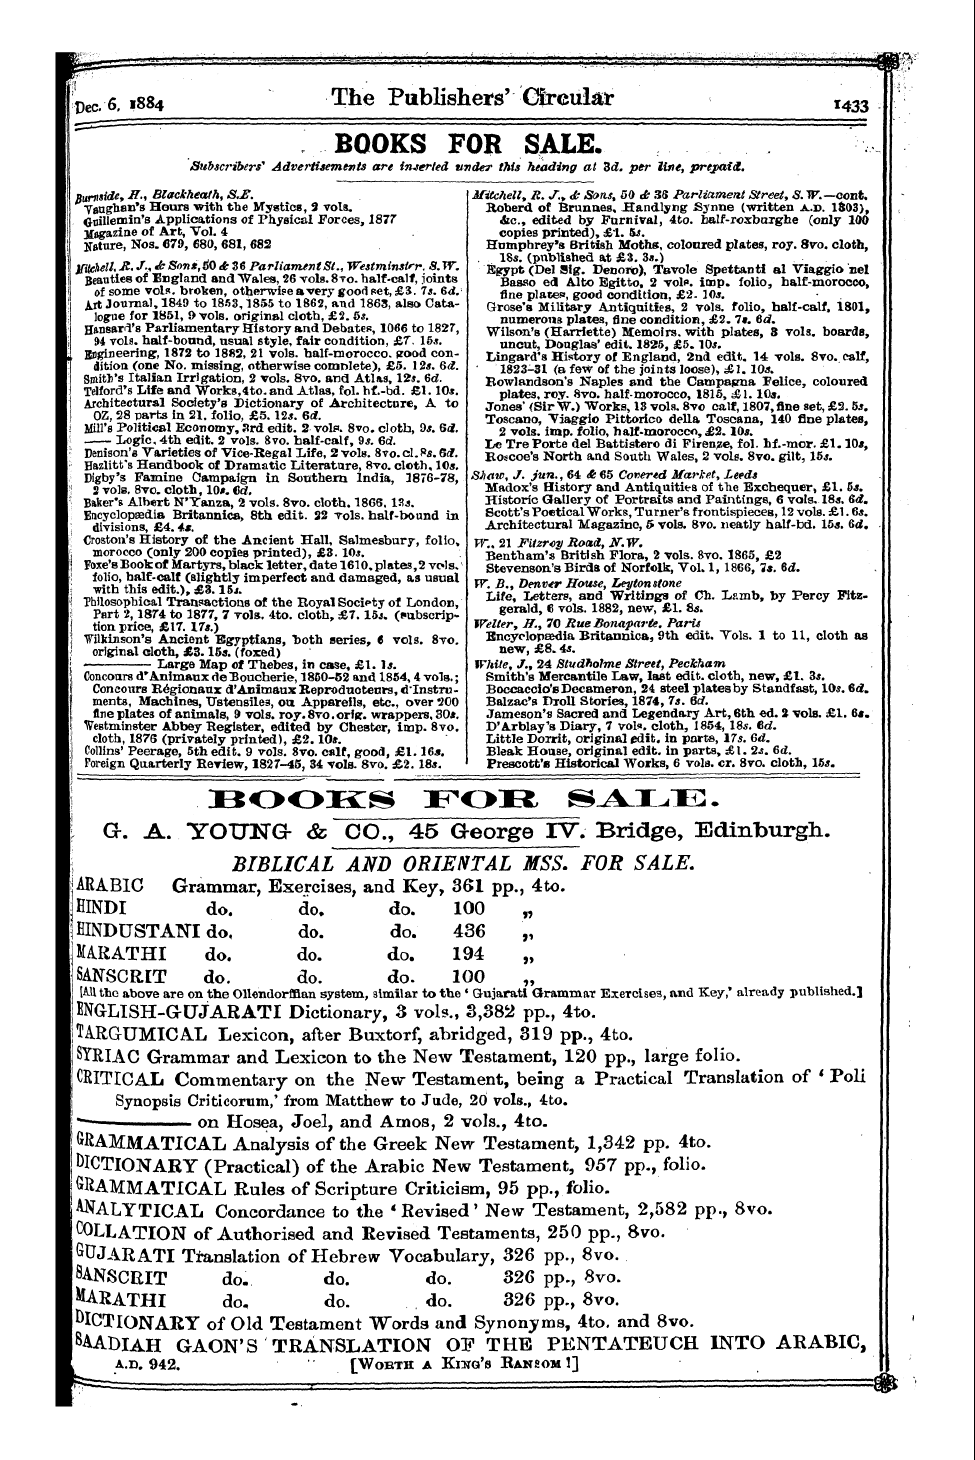 Publishers’ Circular (1880-1890): jS F Y, 1st edition - I Books For Sale. Subscribers' 1 Advei^Tisements Are Inserted Under This Heading At Zd. Per Lint, Prejpaid.